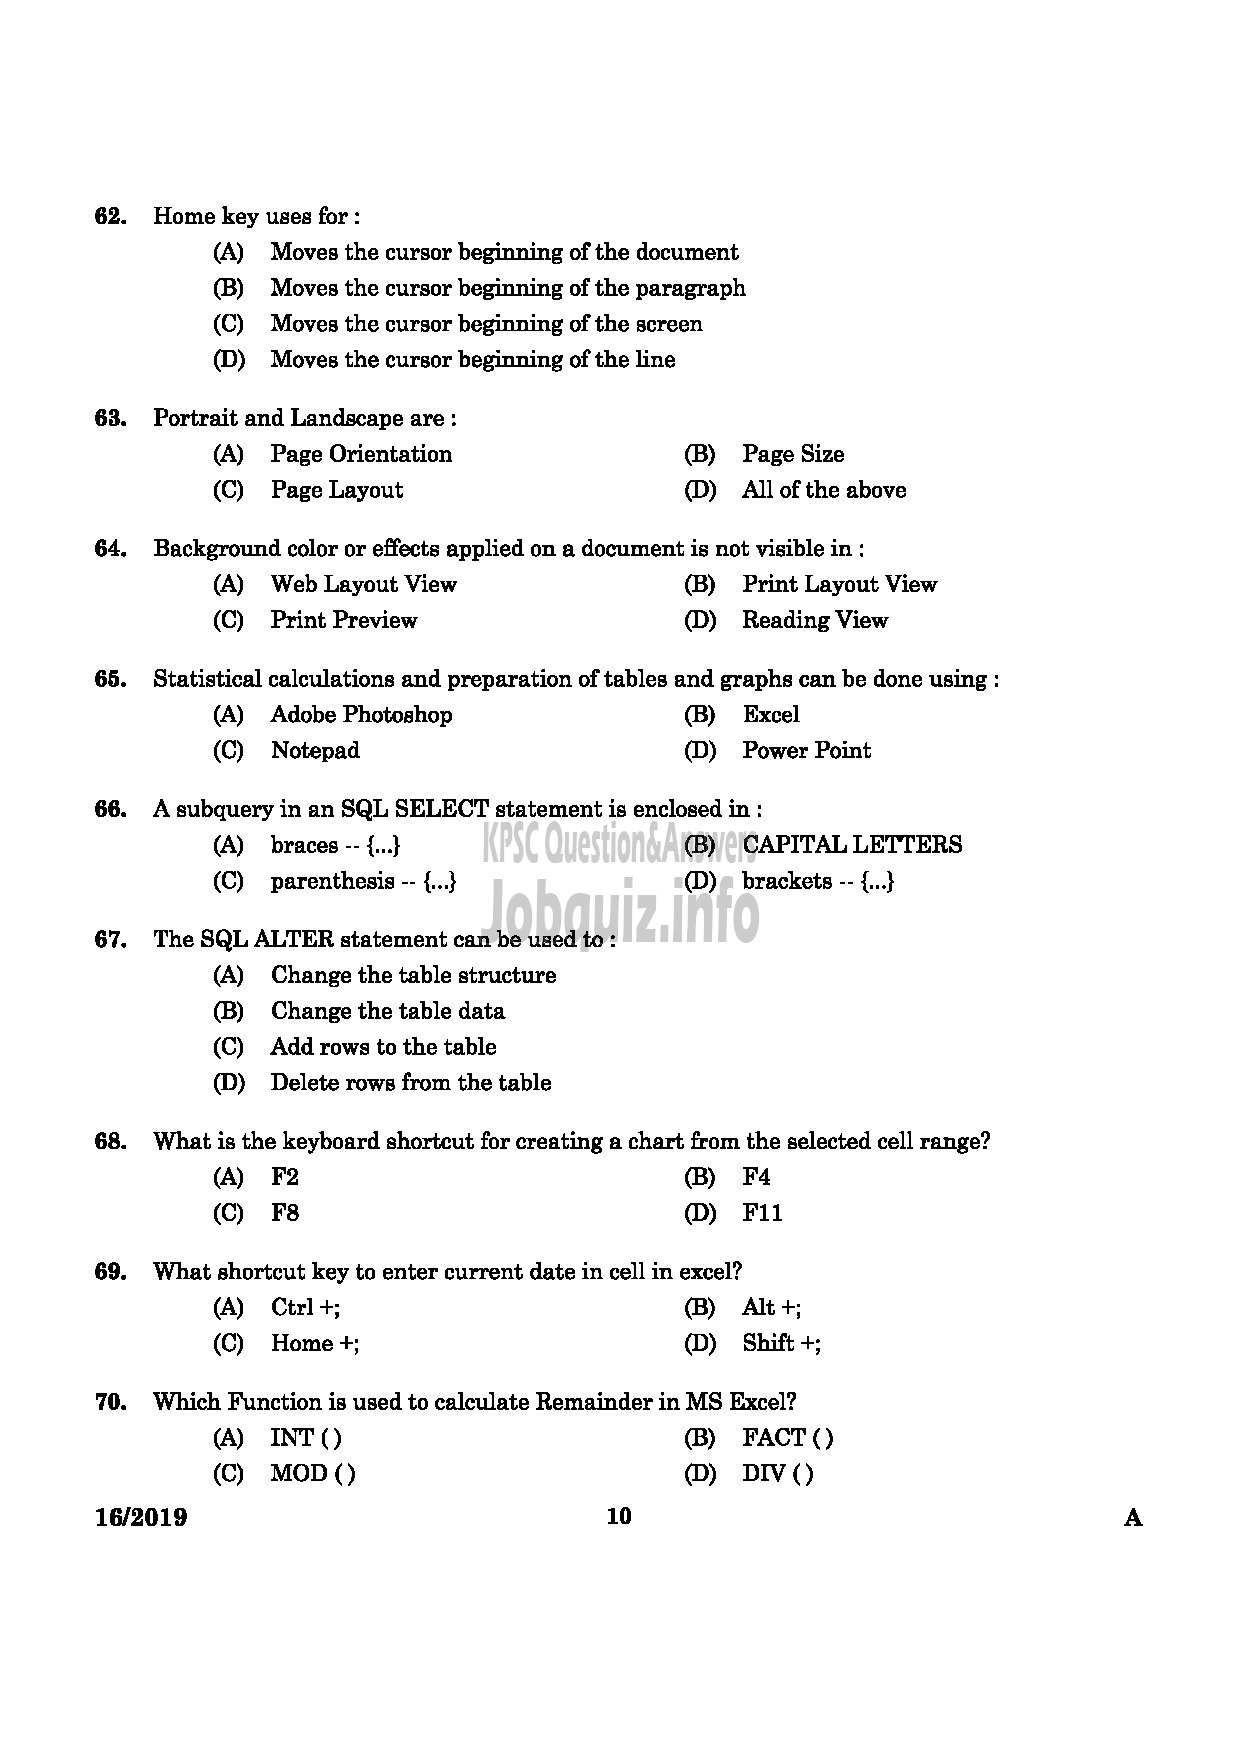 Kerala PSC Question Paper - JUNIOR INSTRUCTOR SOFTWARE TESTING ASSISTANT INDUSTRIAL TRAINING -8